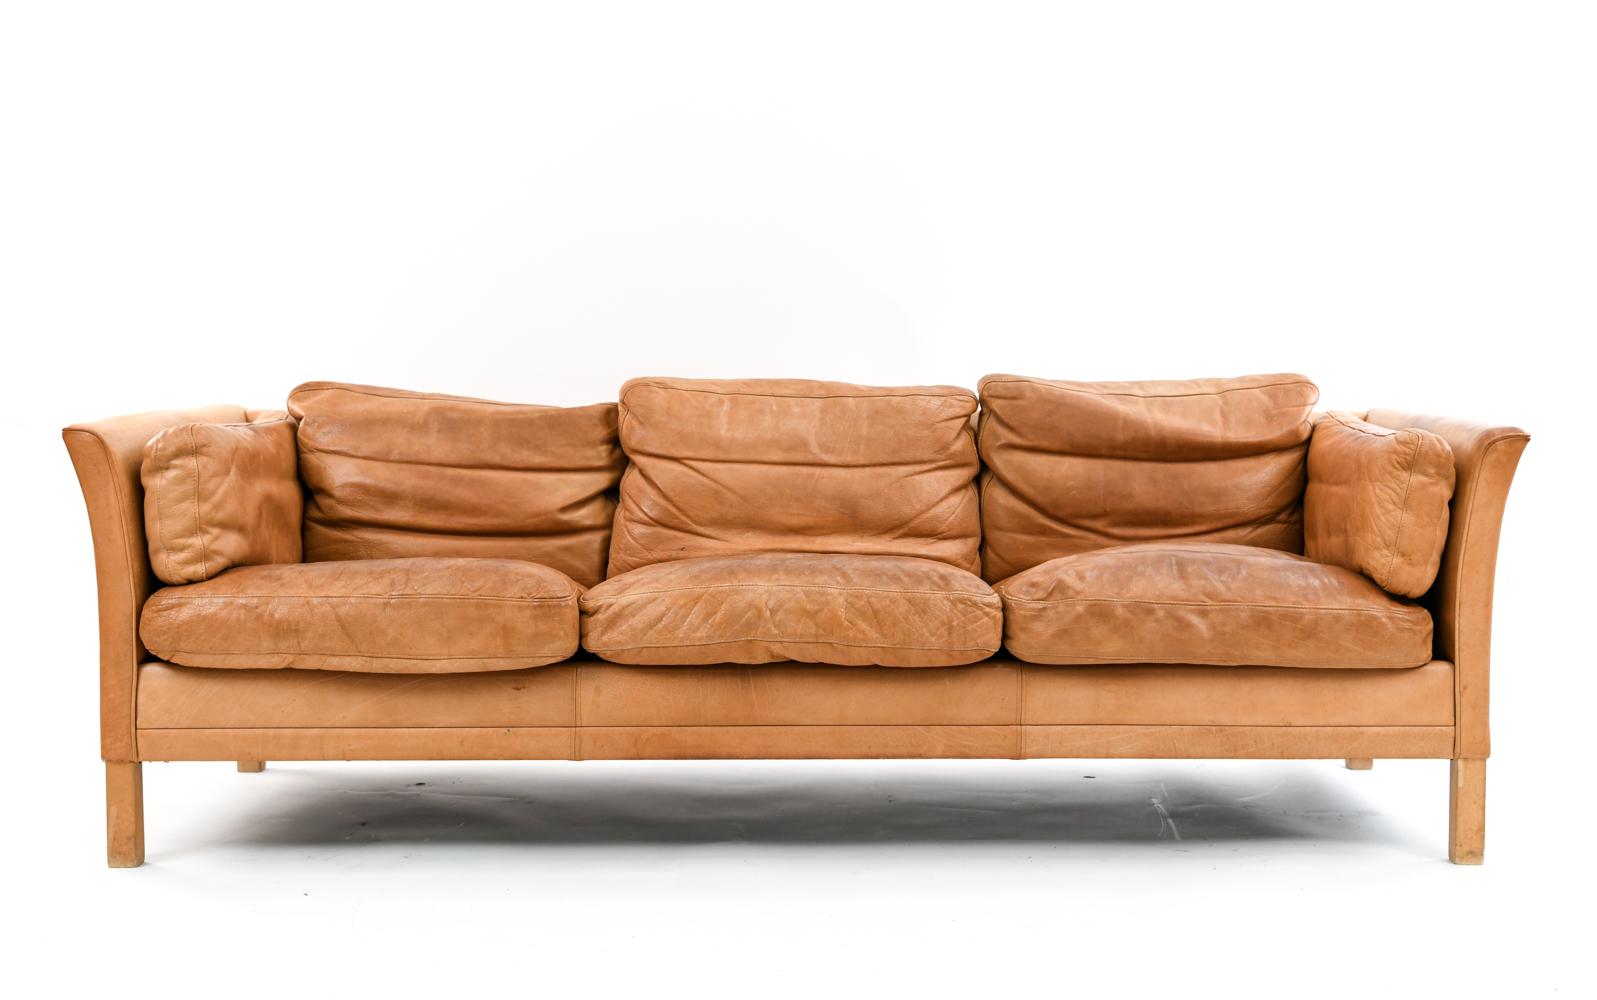 Lovely and comfortably worn thick leather sofa by Mogens Hansen.